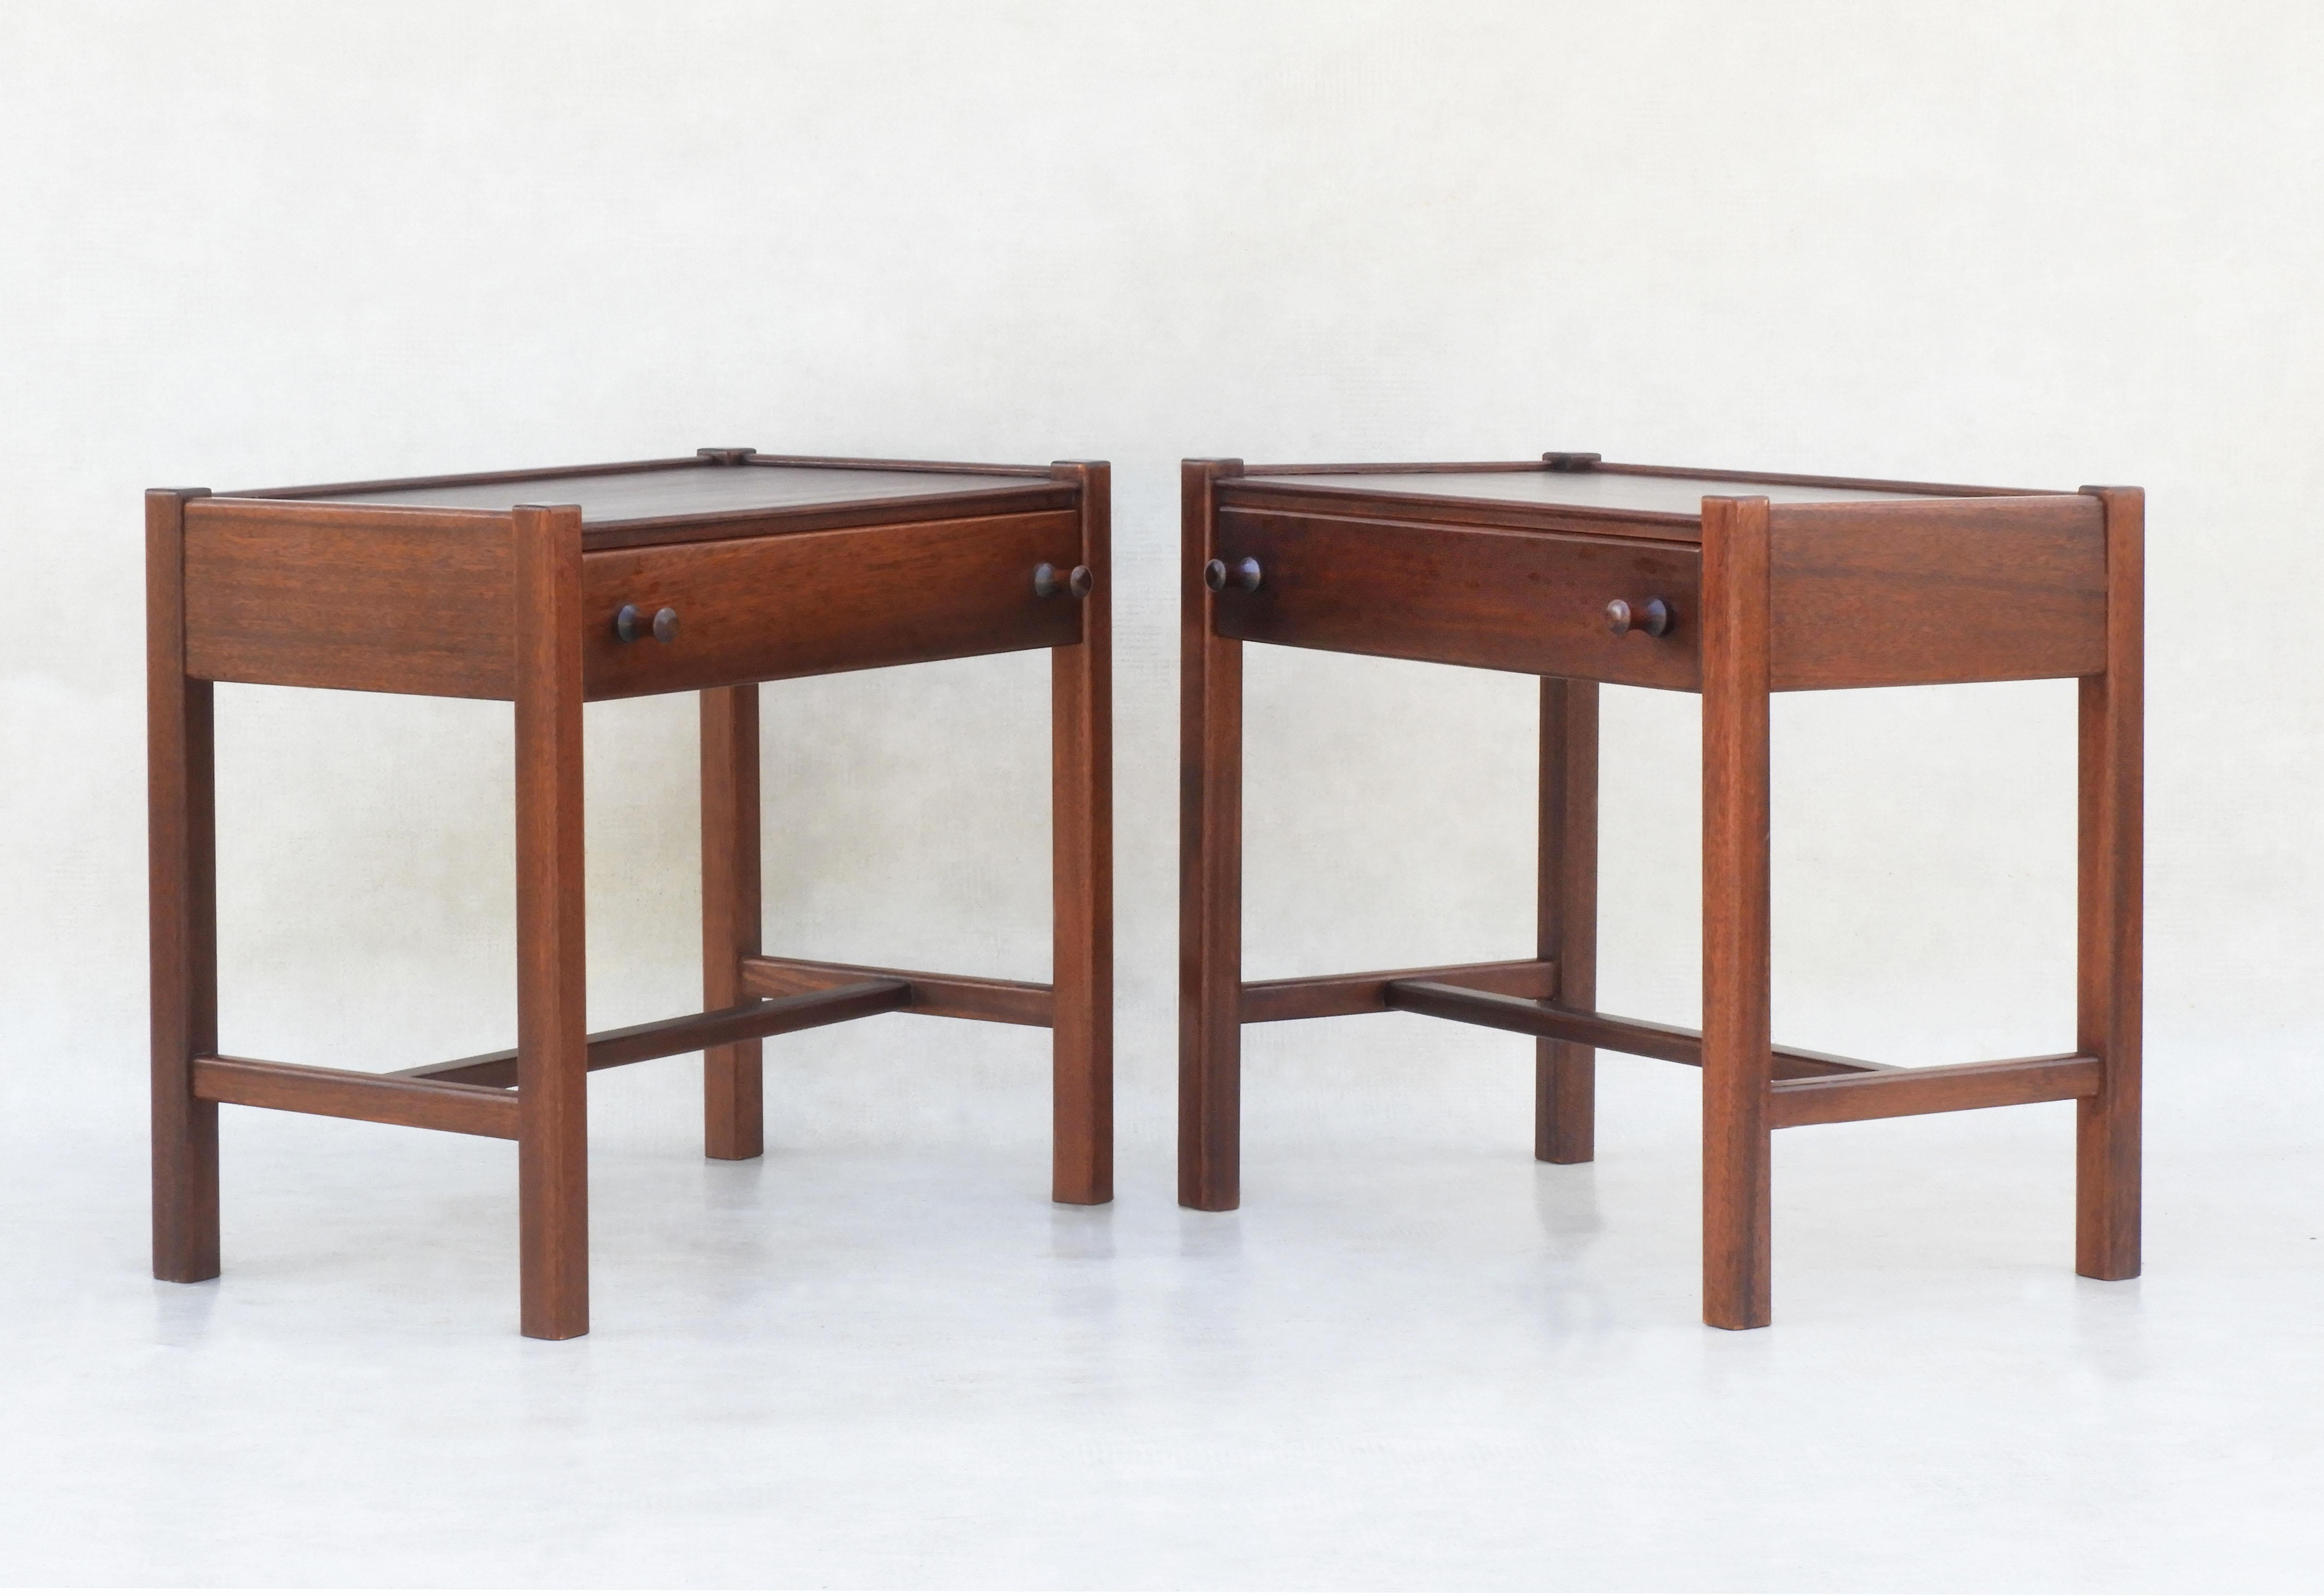 Pair of Vintage nightstands or sofa end tables c1970 France. Stylish and versatile, these single-drawer side tables will sit easily in almost any room and, as they are finished on all four sides, do not need to be placed against a wall. 
Well-made